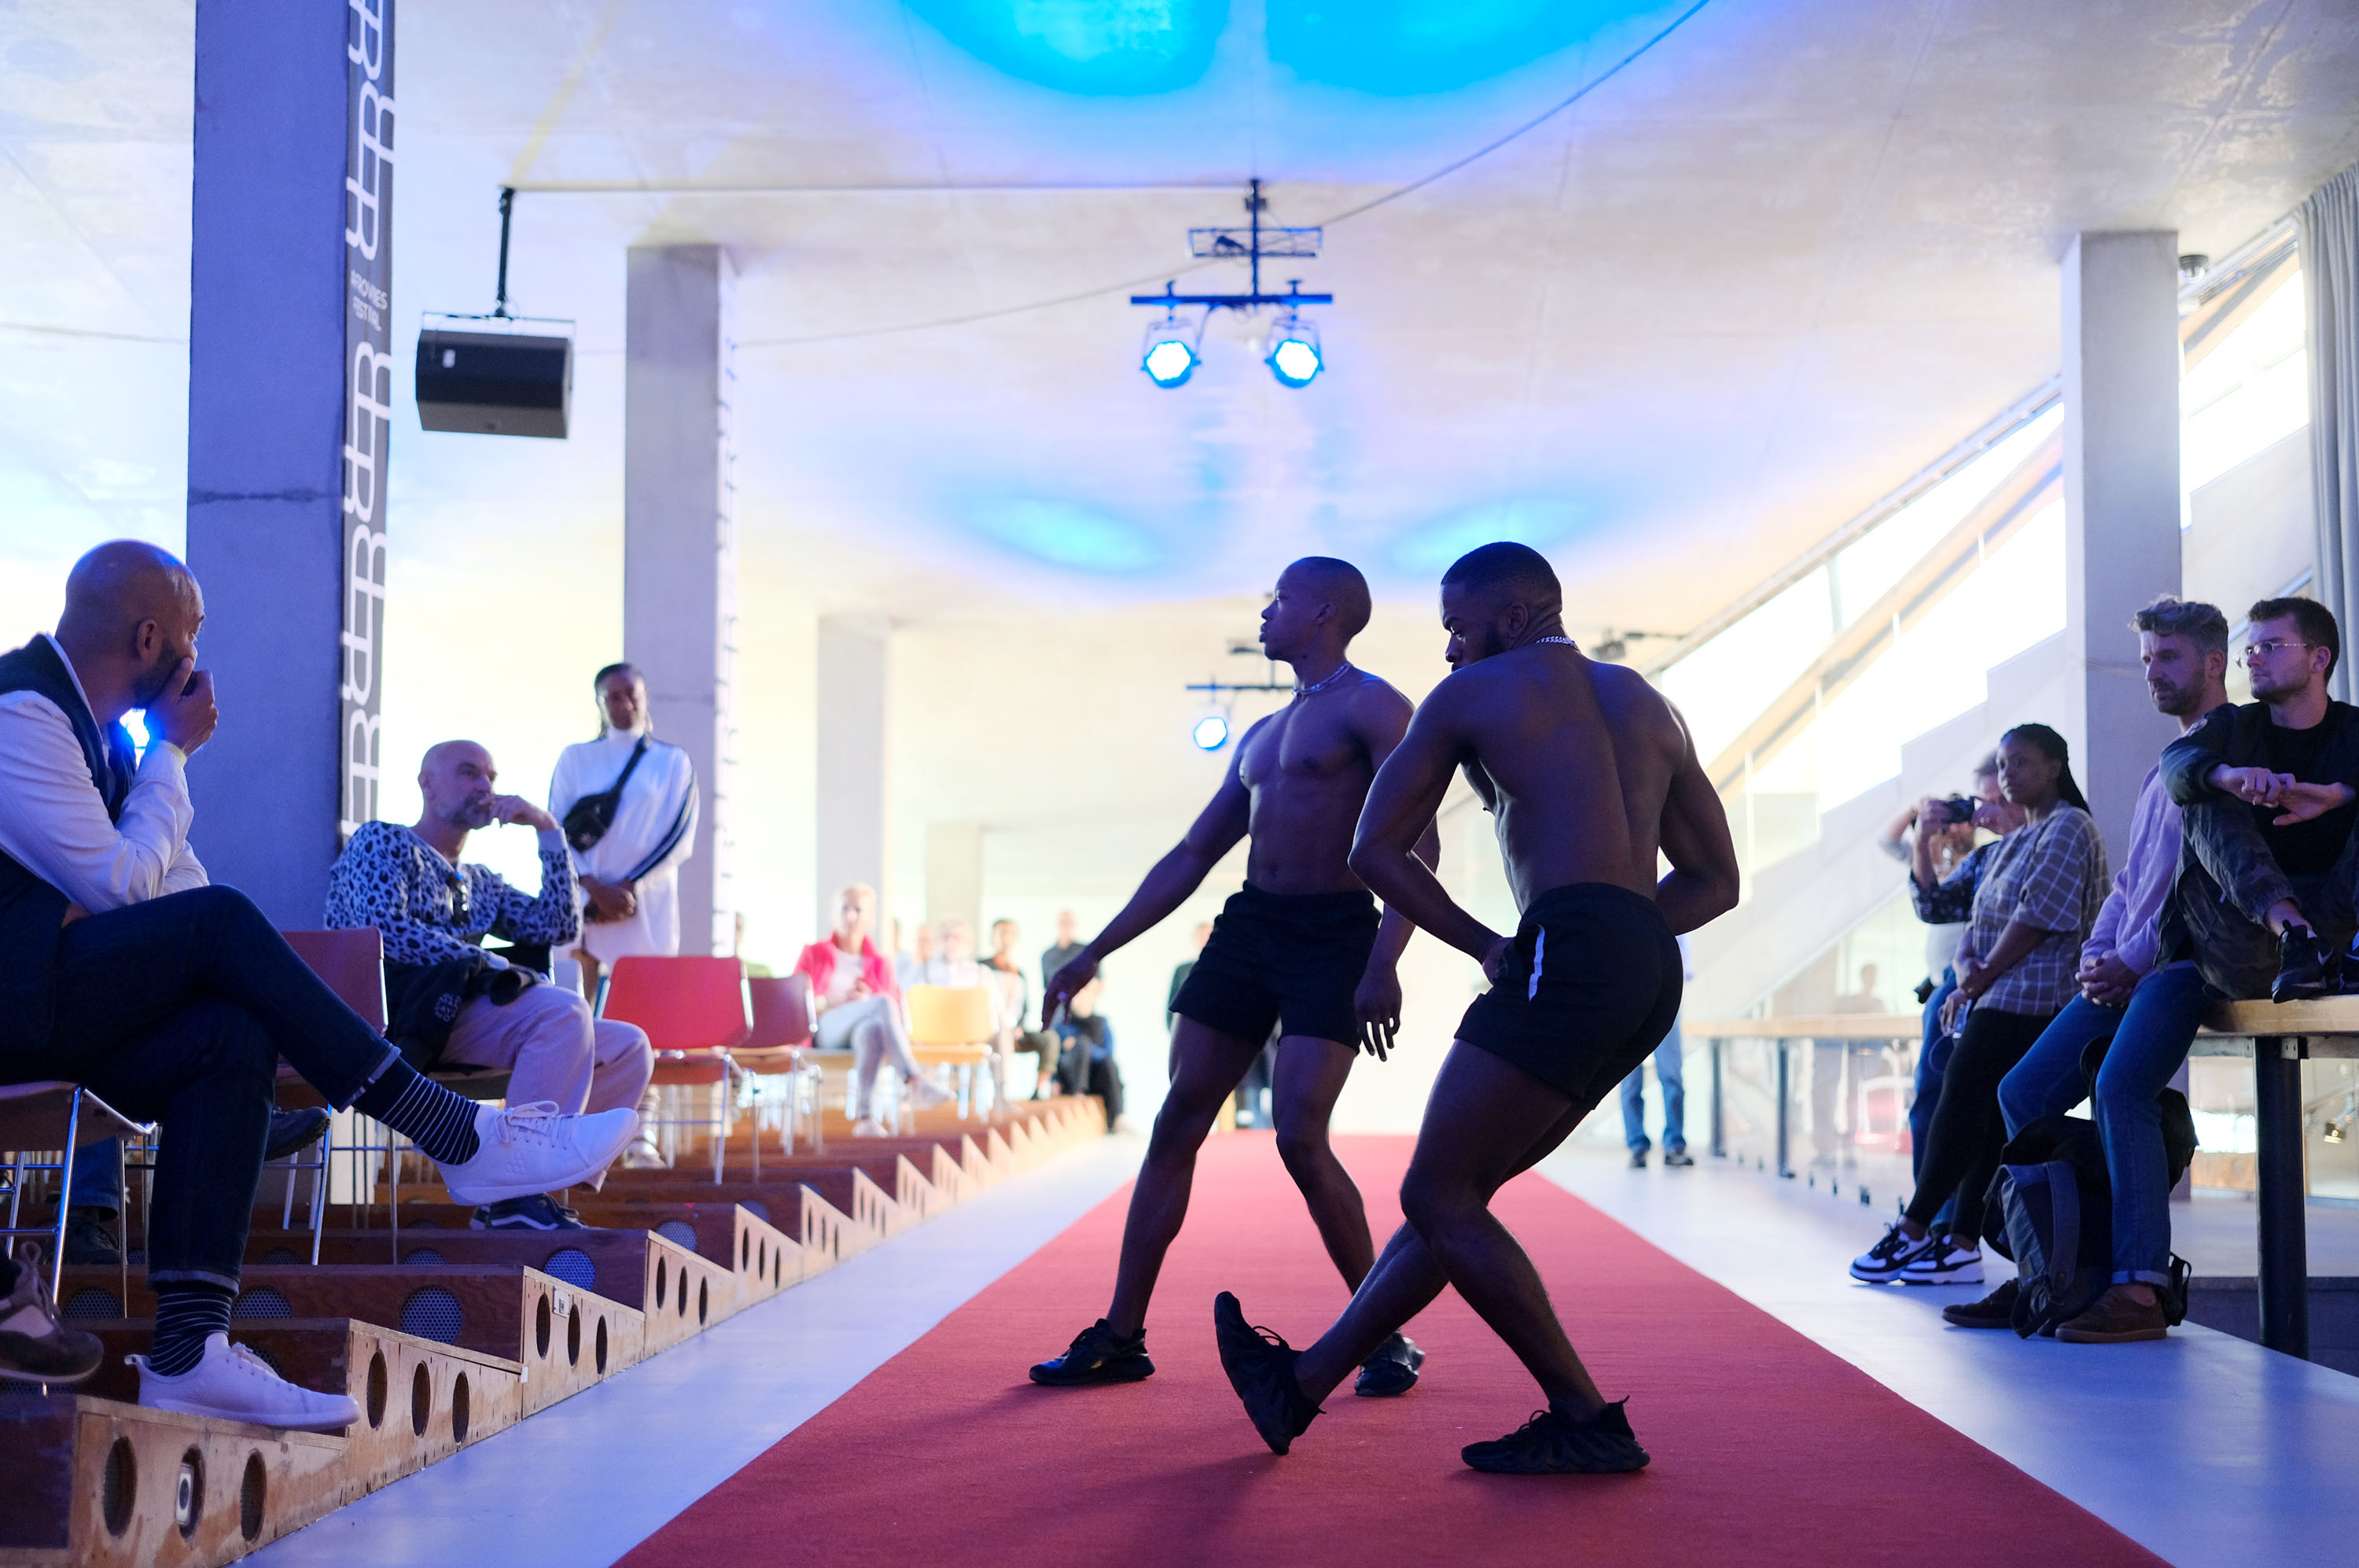 Kwanele Finch Thusi and Kgosi Flietor on the red carpet in the auditorium of Rotterdam Kunsthal with an adapted excerpt from the duet from ‘Pina’ as part of the Afrovibes Take Over programme this past Sunday. Image: John Hogg